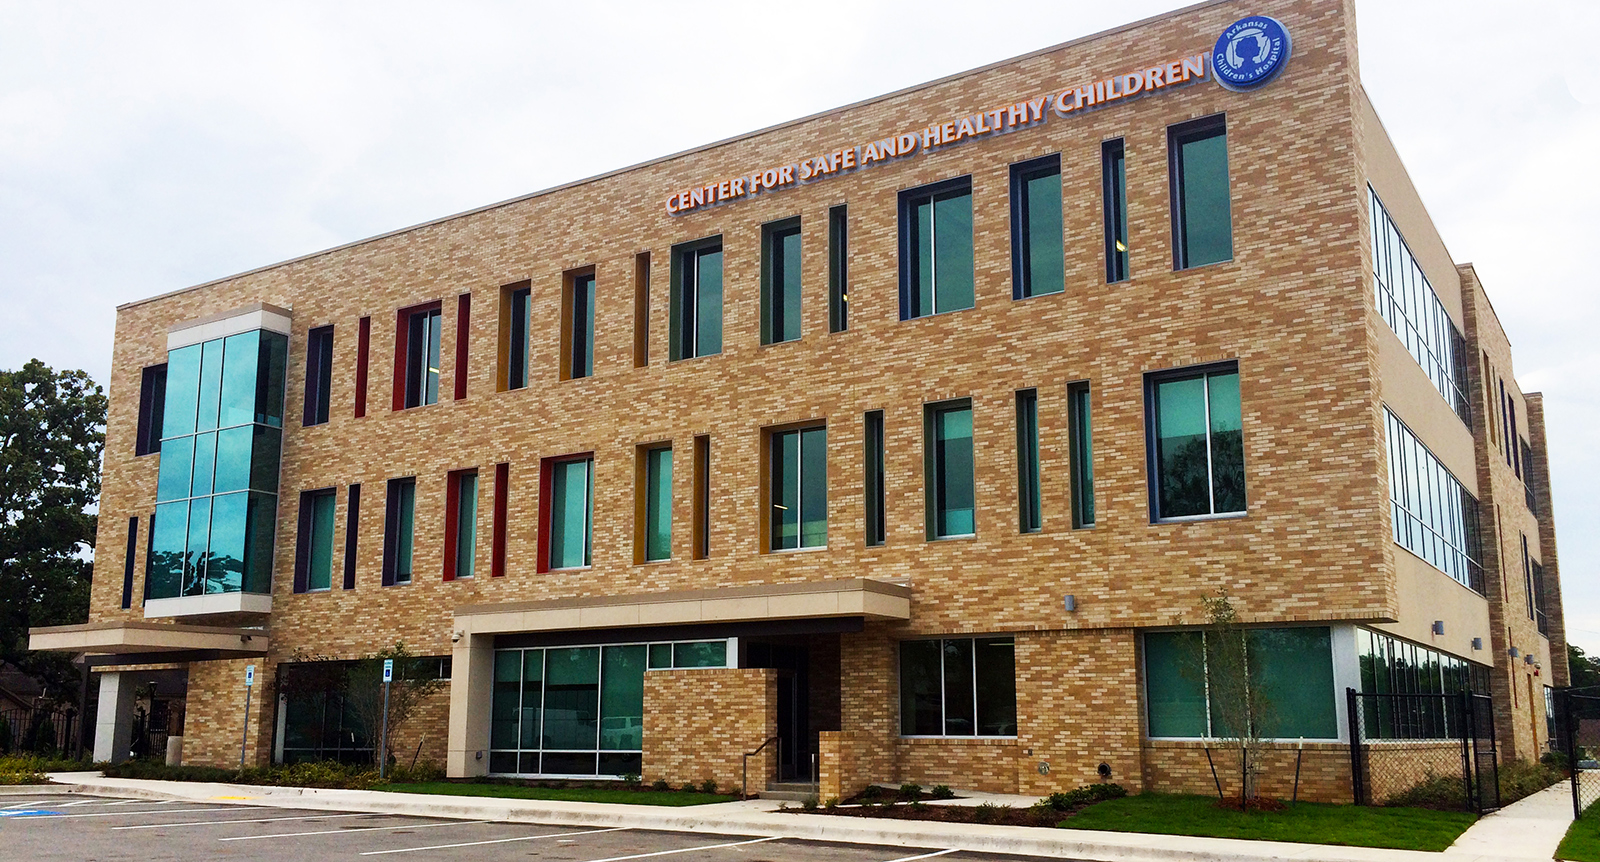 Clark Center for Safe and Healthy Children